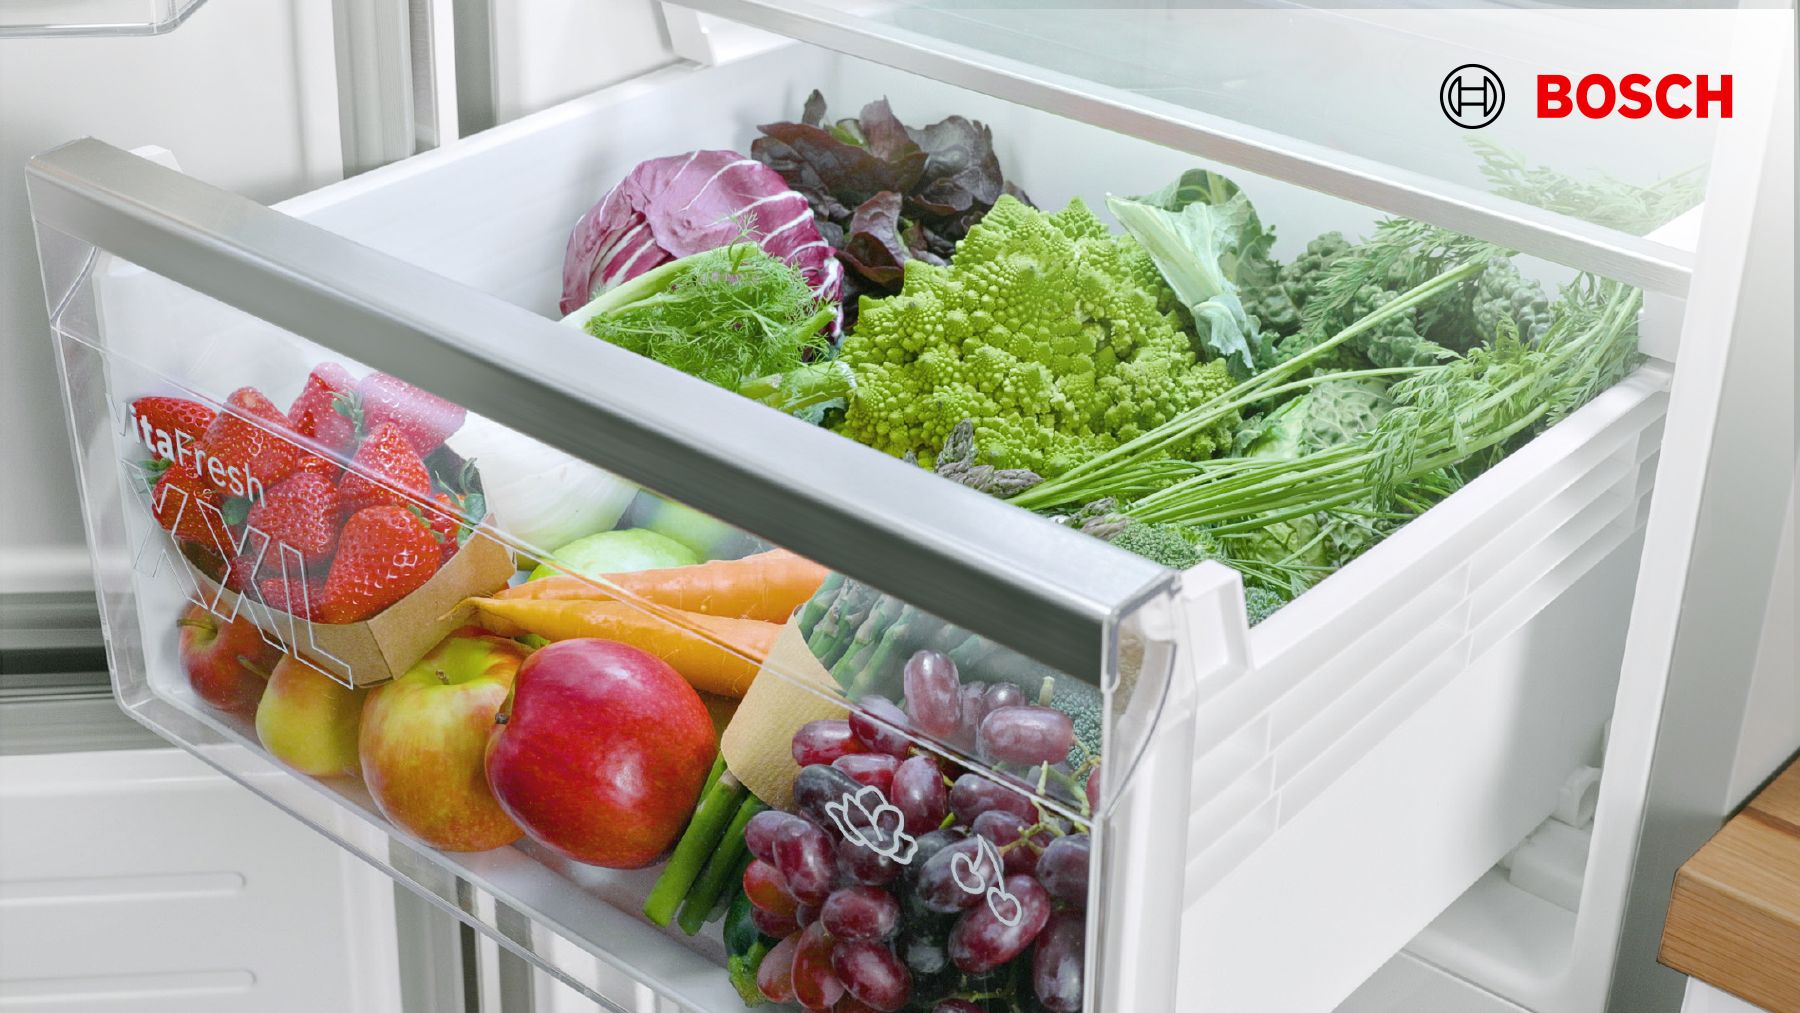 product shot of a bosch fridge draw full of fresh vegitables - Keep food fresh for longer with Vitafresh and Get Free Recycling on selected Bosch models